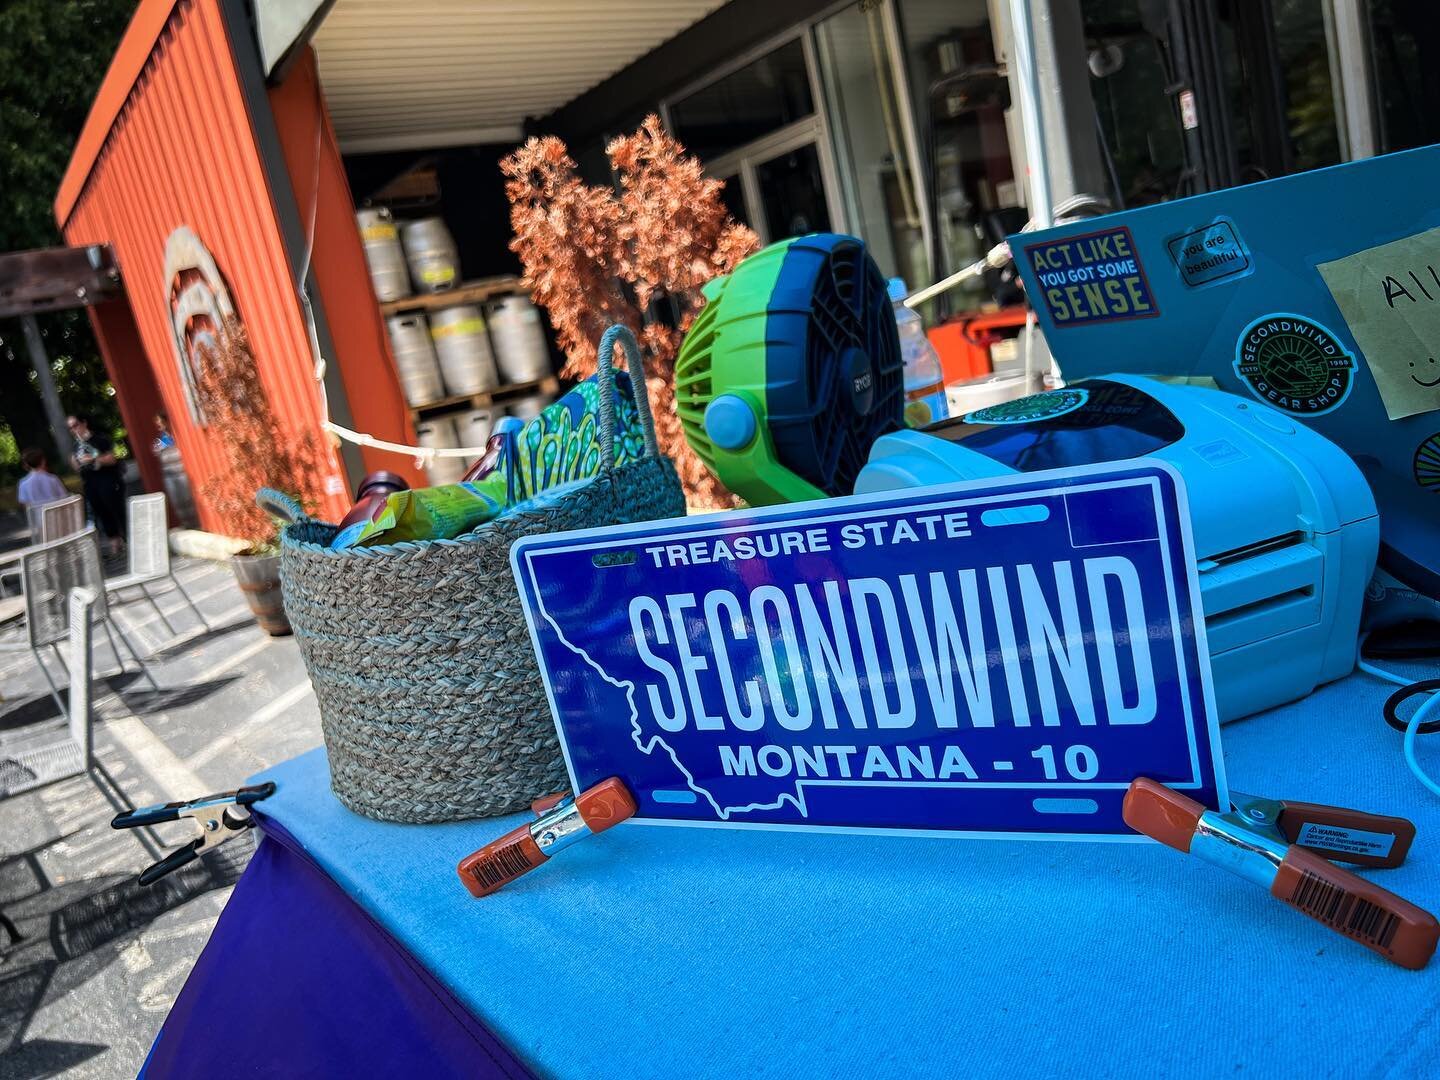 Currently out of stickers but got some new signage! #montucky @secondwind_bozeman